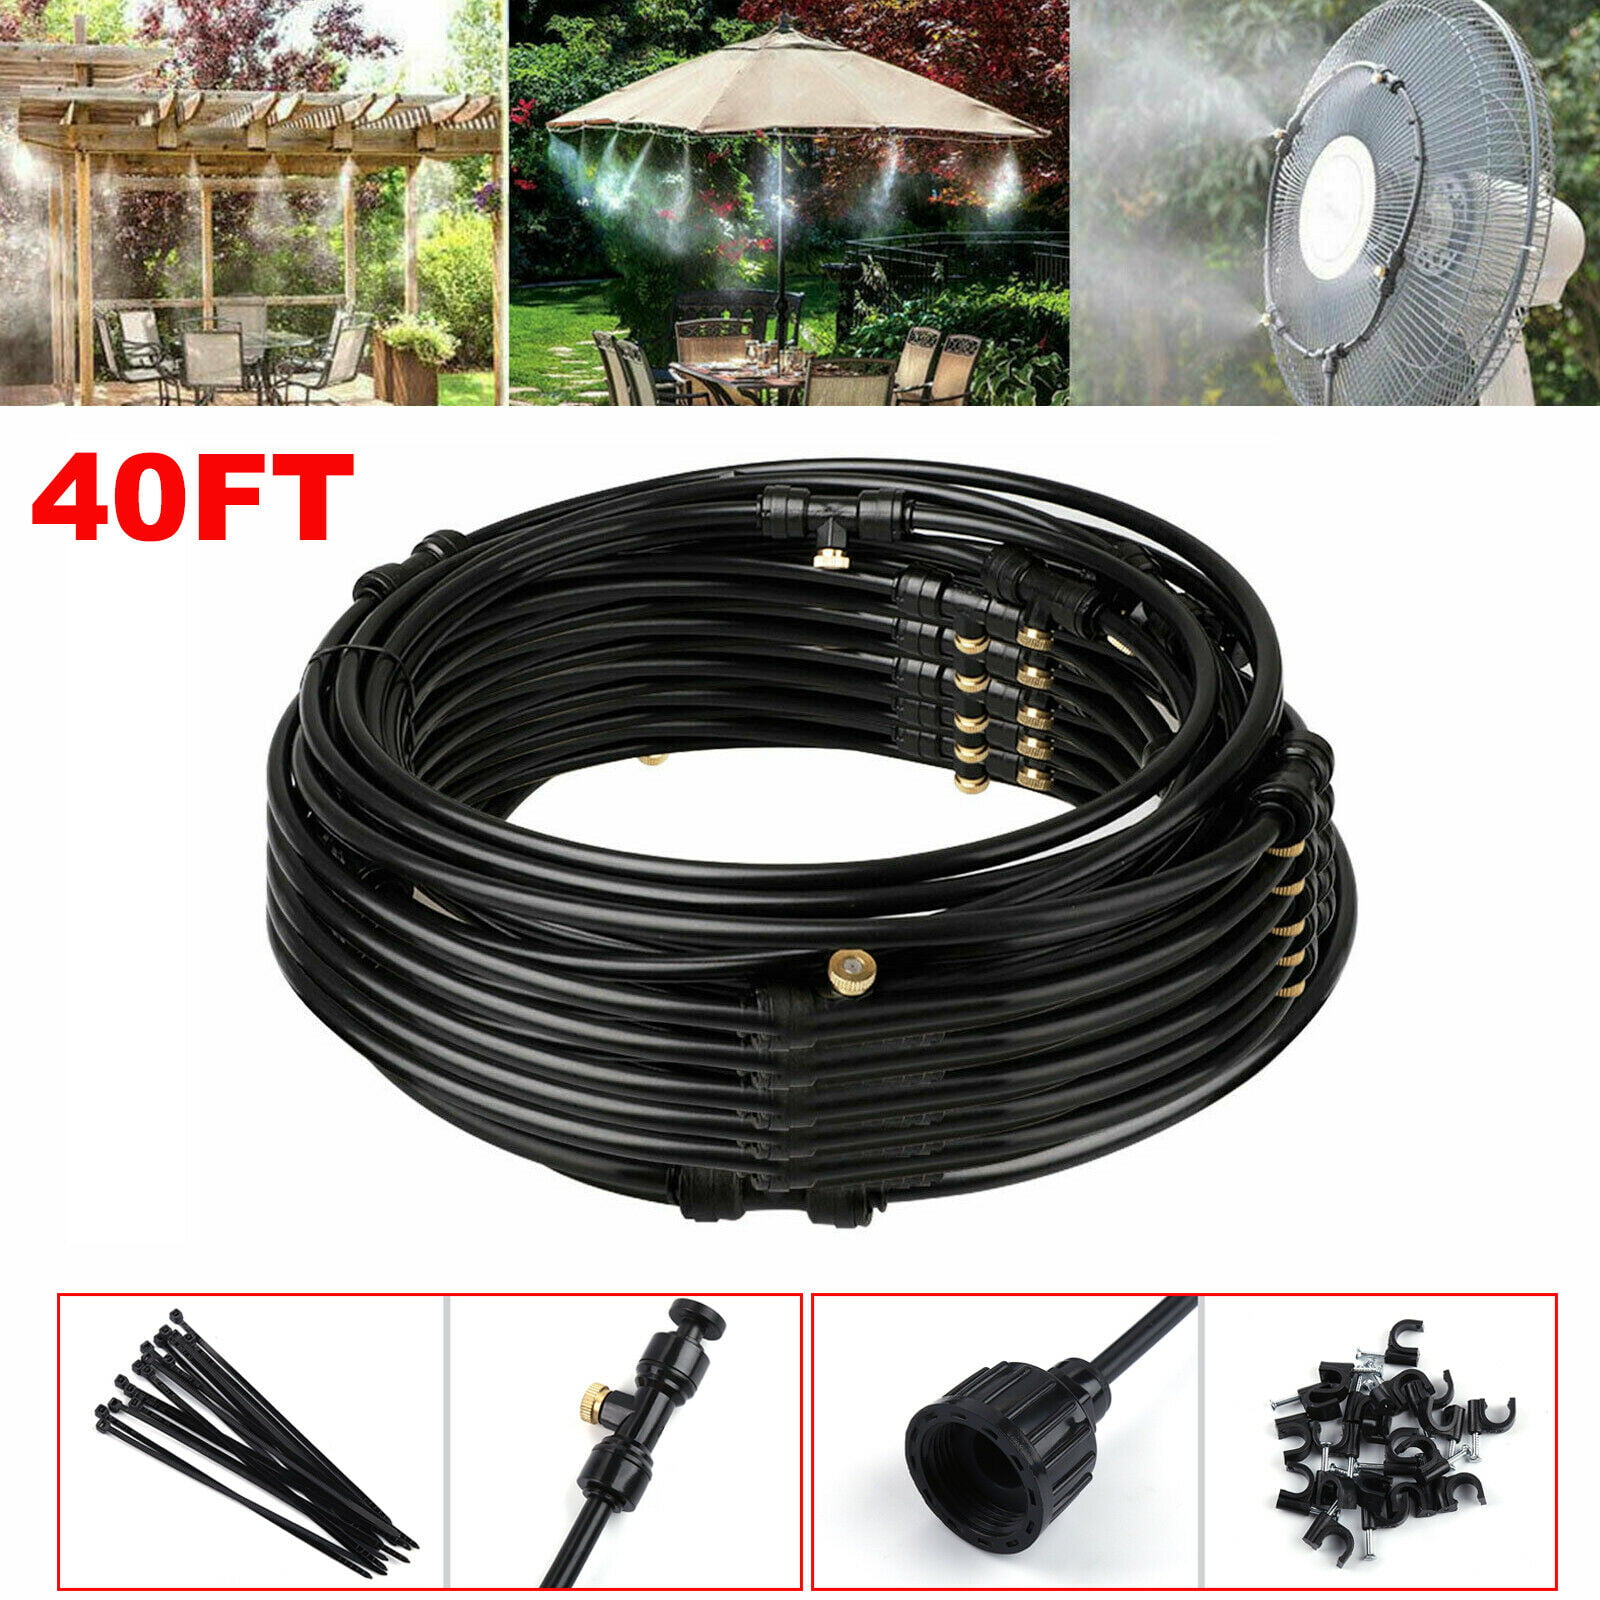 Outdoor Misting Cooling System Garden Irrigation Water Misting Nozzles Set Hose 